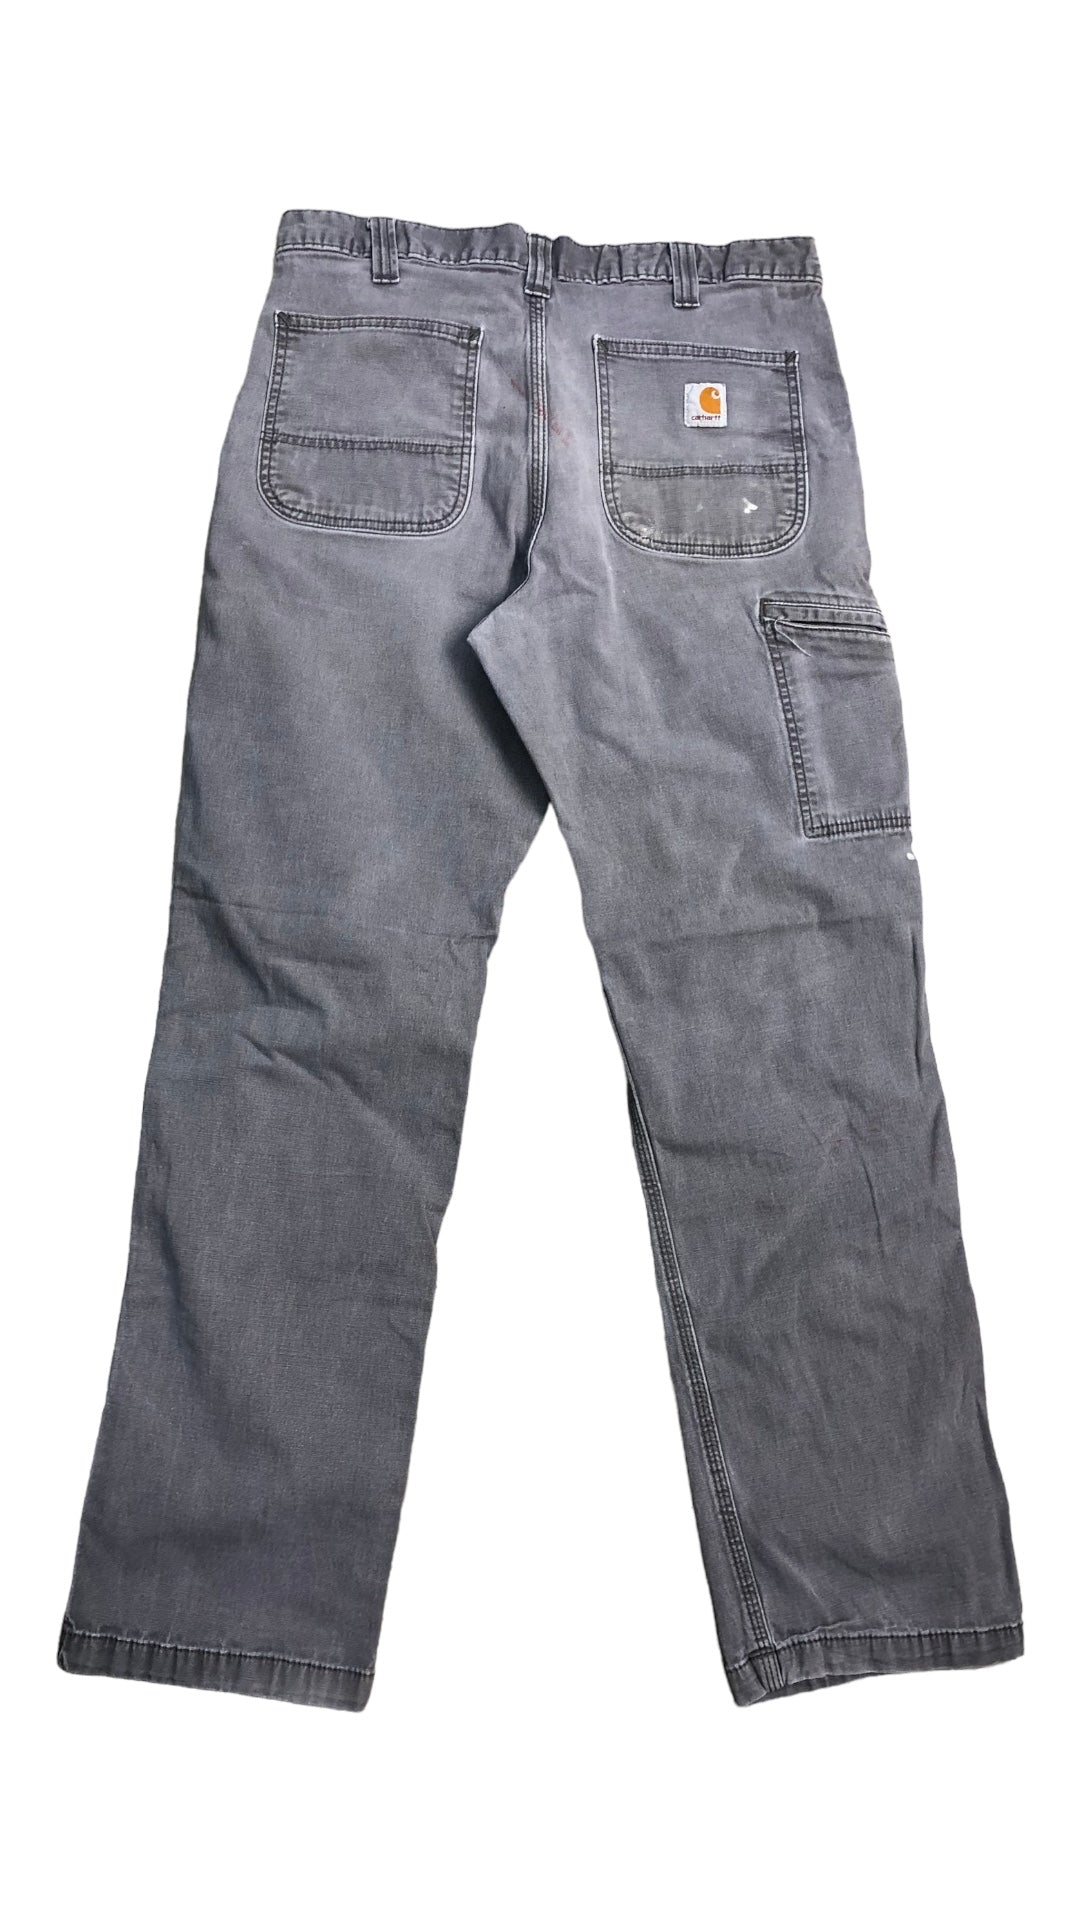 Used Gray Carhartt Relaxed Fit Jeans Sz 33x30